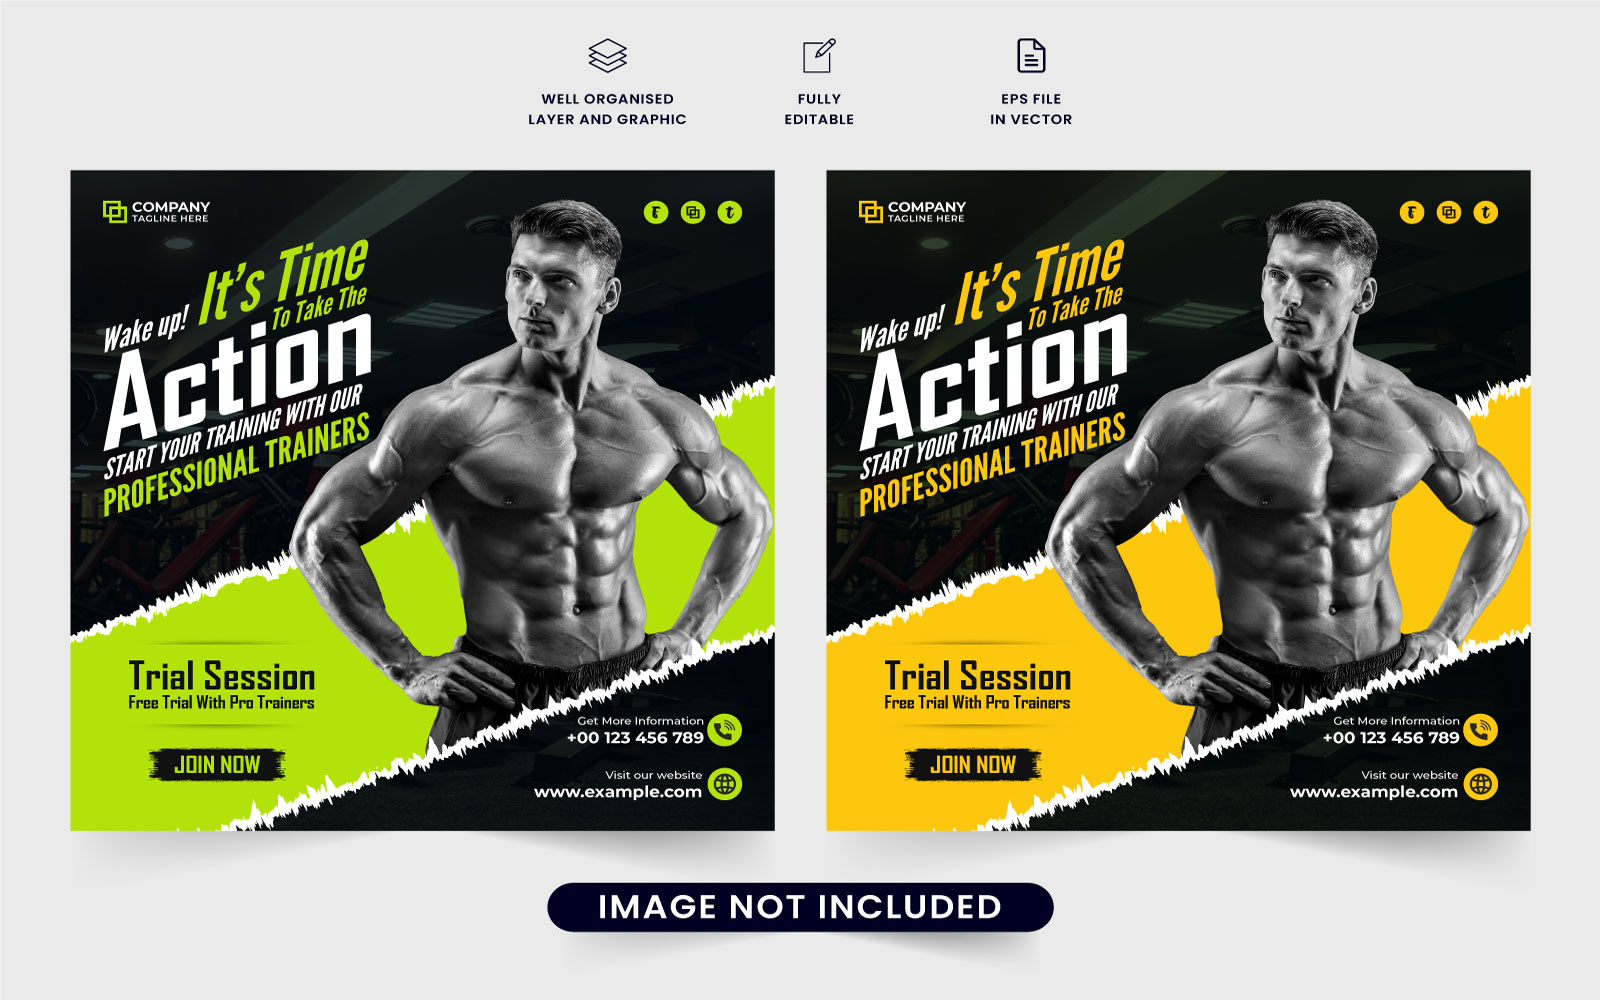 Gym workout service template vector